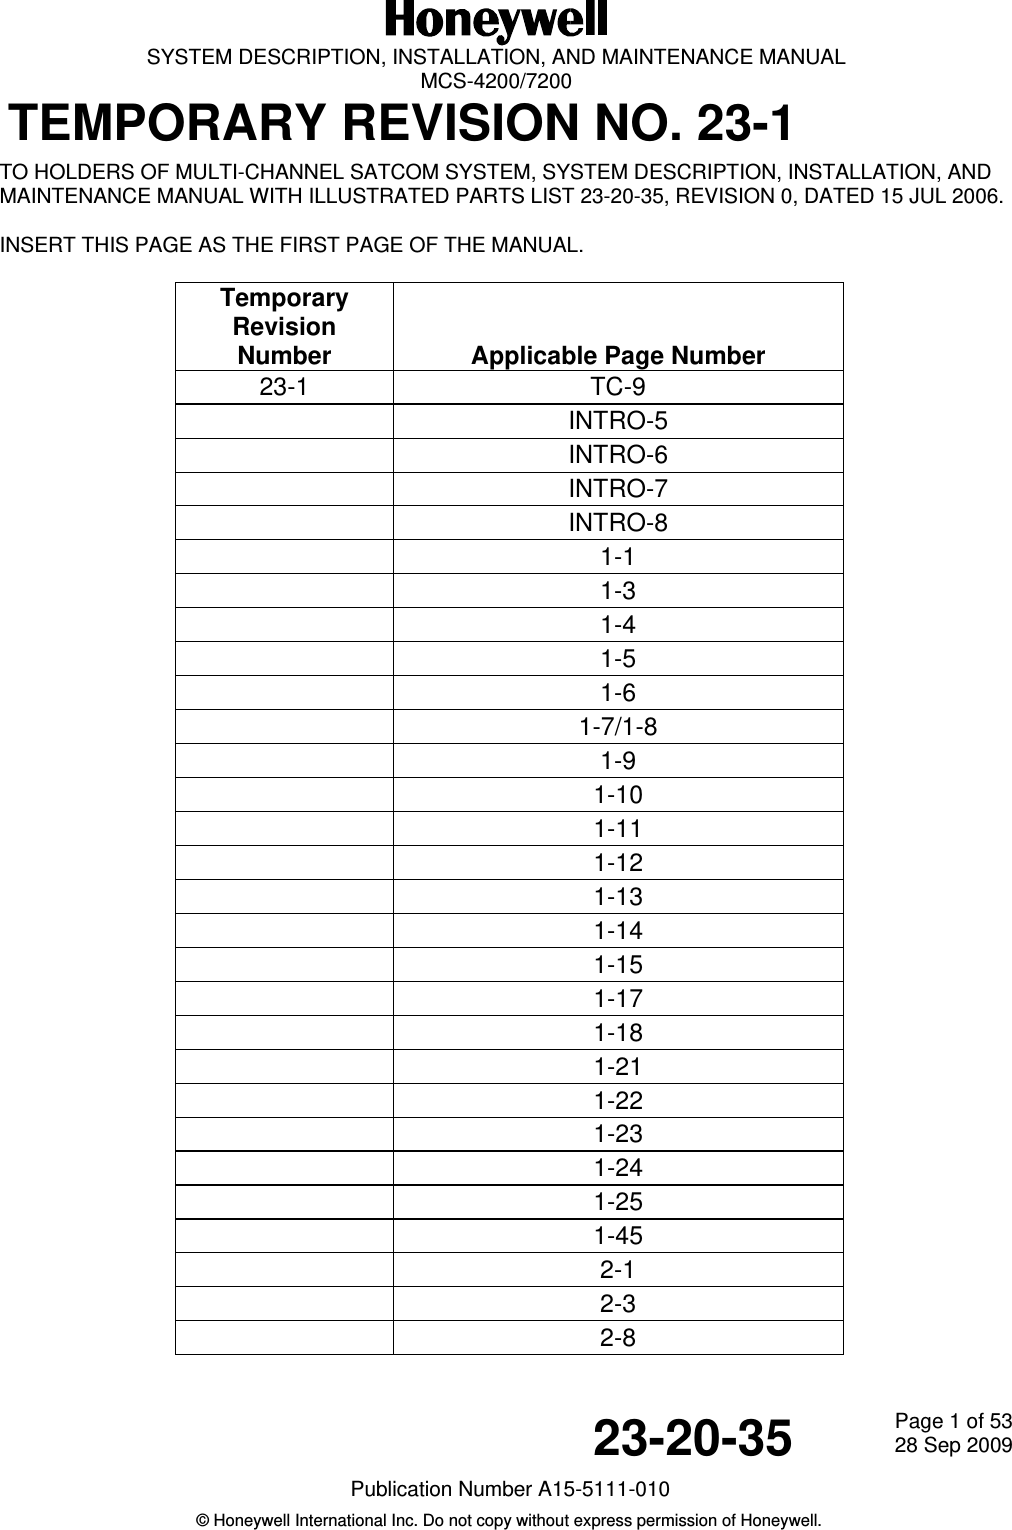   SYSTEM DESCRIPTION, INSTALLATION, AND MAINTENANCE MANUAL  MCS-4200/7200 TEMPORARY REVISION NO. 23-123-20-35  Page 1 of 5328 Sep 2009Publication Number A15-5111-010 © Honeywell International Inc. Do not copy without express permission of Honeywell.   TO HOLDERS OF MULTI-CHANNEL SATCOM SYSTEM, SYSTEM DESCRIPTION, INSTALLATION, AND MAINTENANCE MANUAL WITH ILLUSTRATED PARTS LIST 23-20-35, REVISION 0, DATED 15 JUL 2006.  INSERT THIS PAGE AS THE FIRST PAGE OF THE MANUAL.  Temporary Revision Number   Applicable Page Number 23-1 TC-9  INTRO-5  INTRO-6  INTRO-7  INTRO-8  1-1  1-3  1-4  1-5  1-6  1-7/1-8  1-9  1-10  1-11  1-12  1-13  1-14  1-15  1-17  1-18  1-21  1-22  1-23  1-24  1-25  1-45  2-1  2-3  2-8 